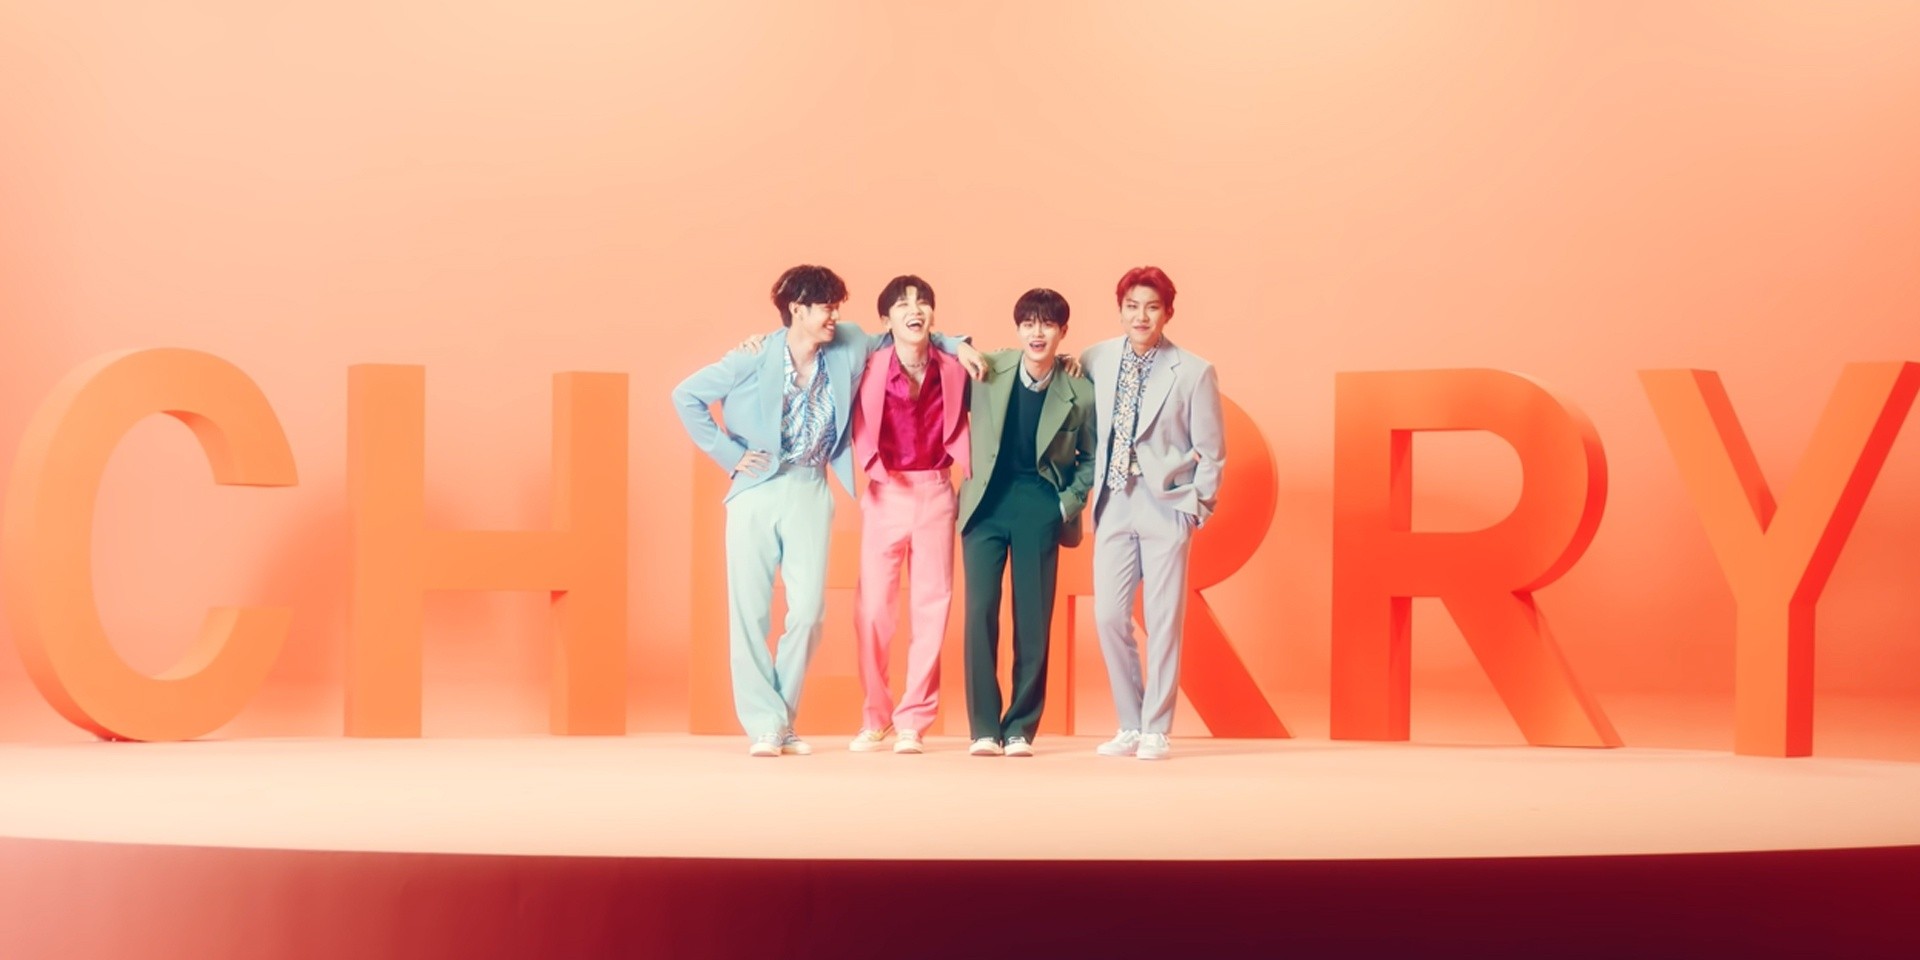 AB6IX drop self-produced sophomore album MO’ COMPLETE and playful 'CHERRY' music video – listen